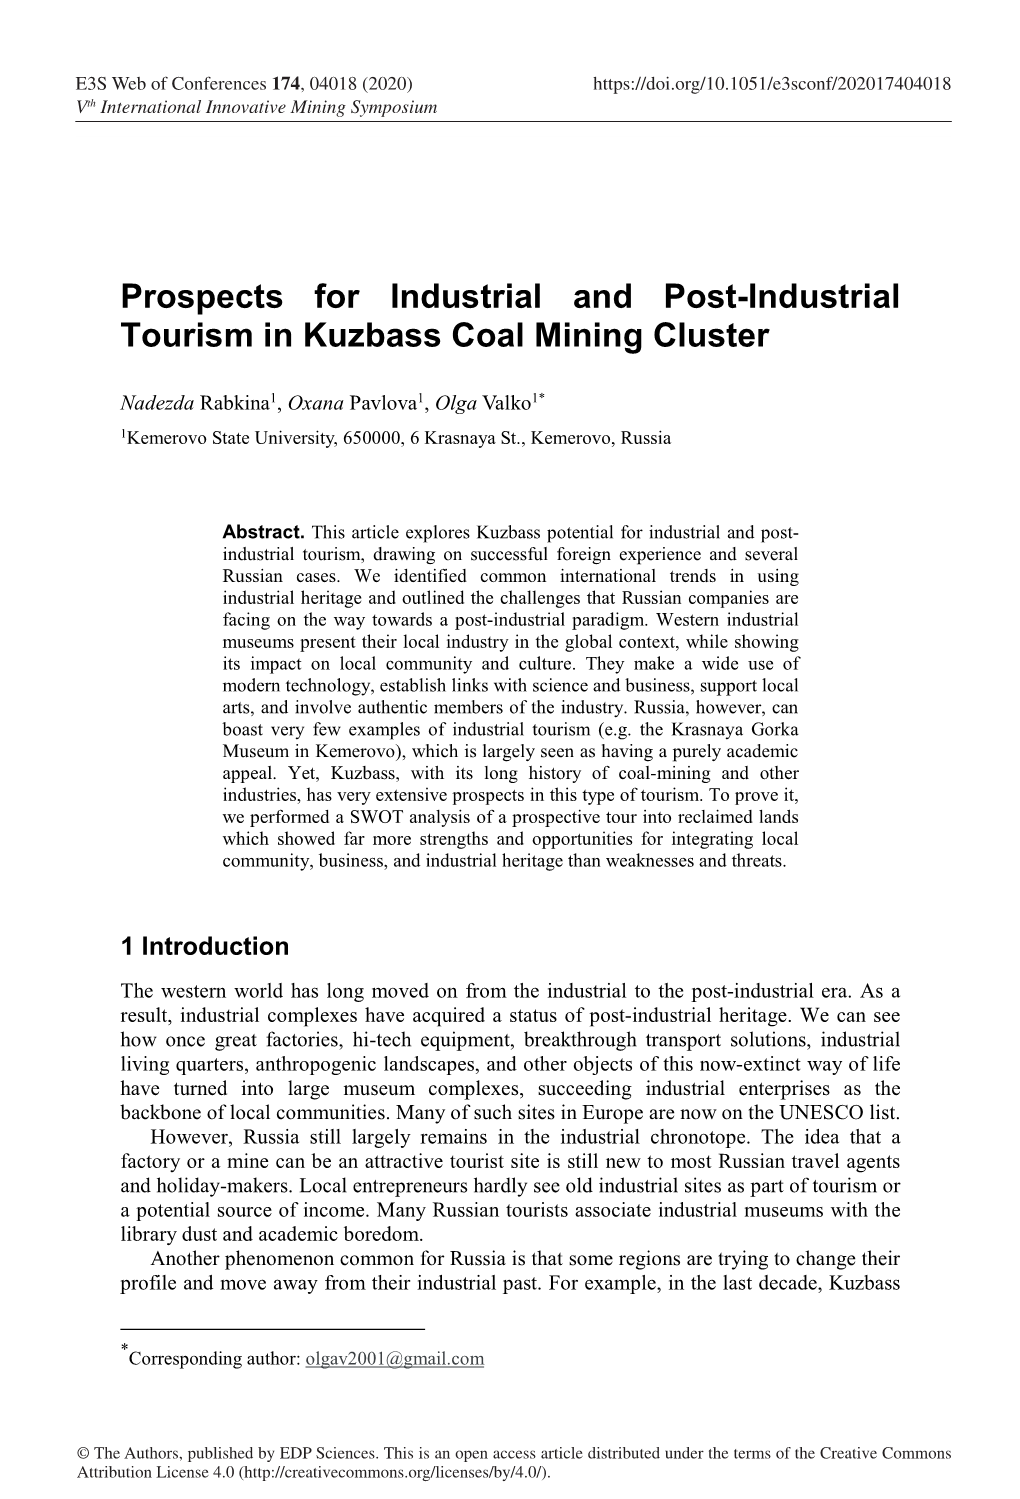 Prospects for Industrial and Post-Industrial Tourism in Kuzbass Coal Mining Cluster